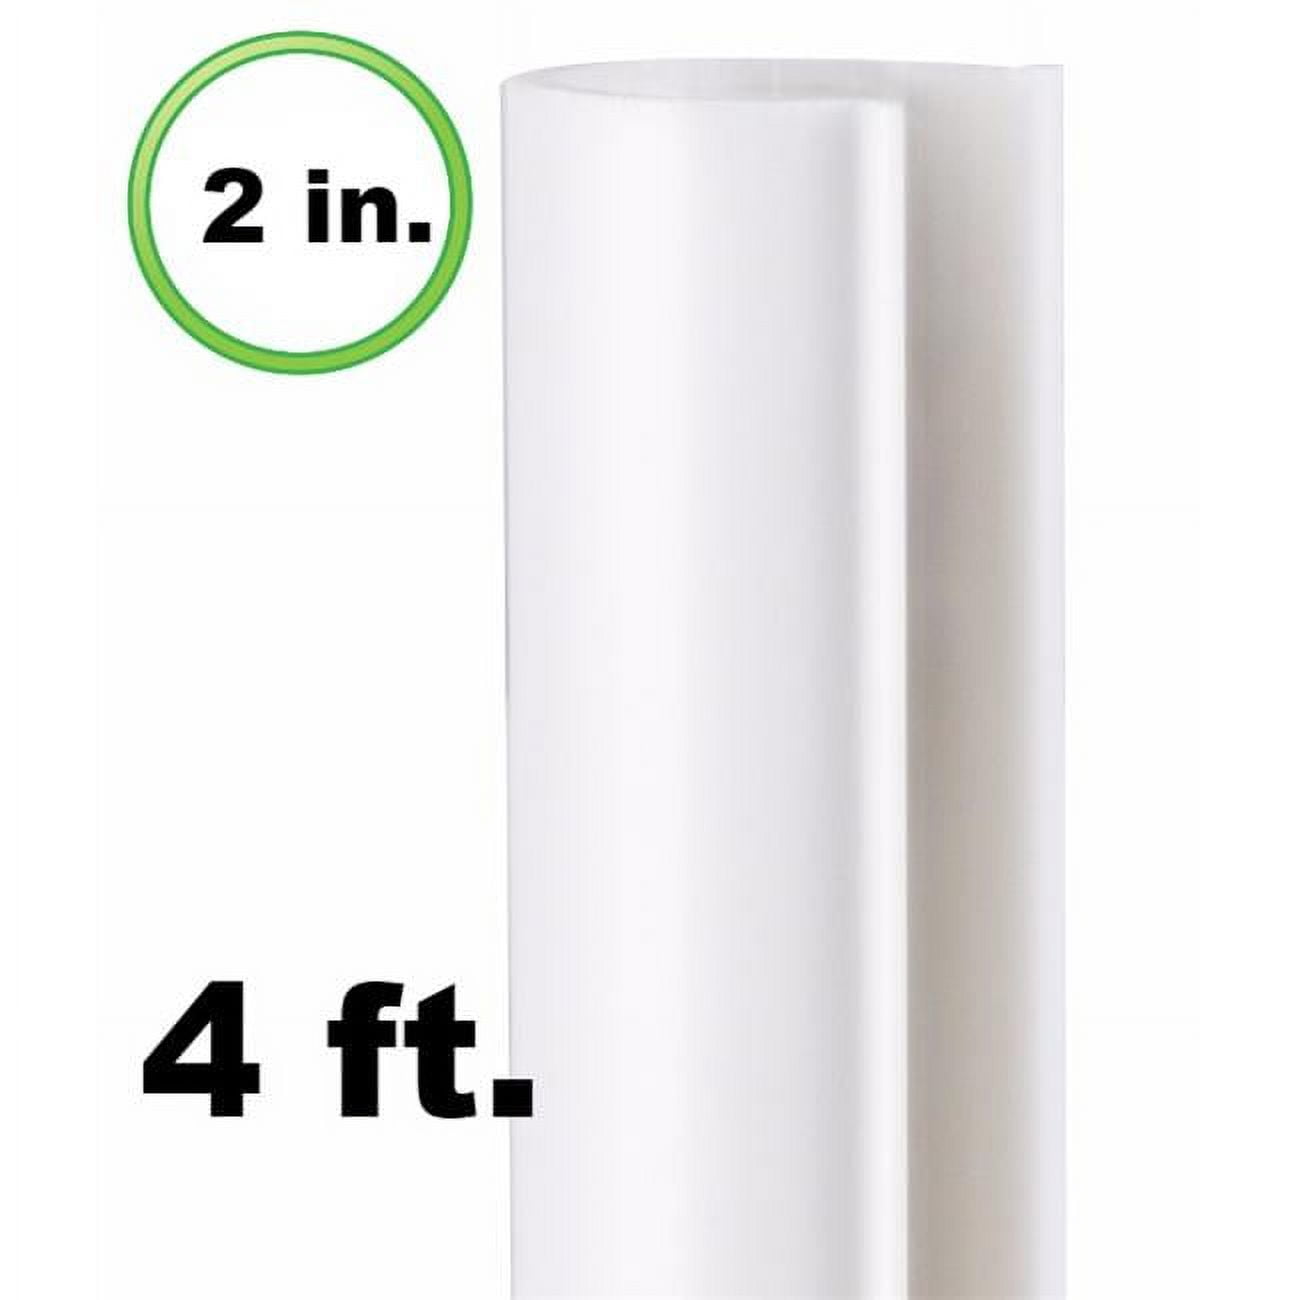 06 4 Ft. X 2 In. Snap Clamp Abs For 2 In. Pvc Pipe